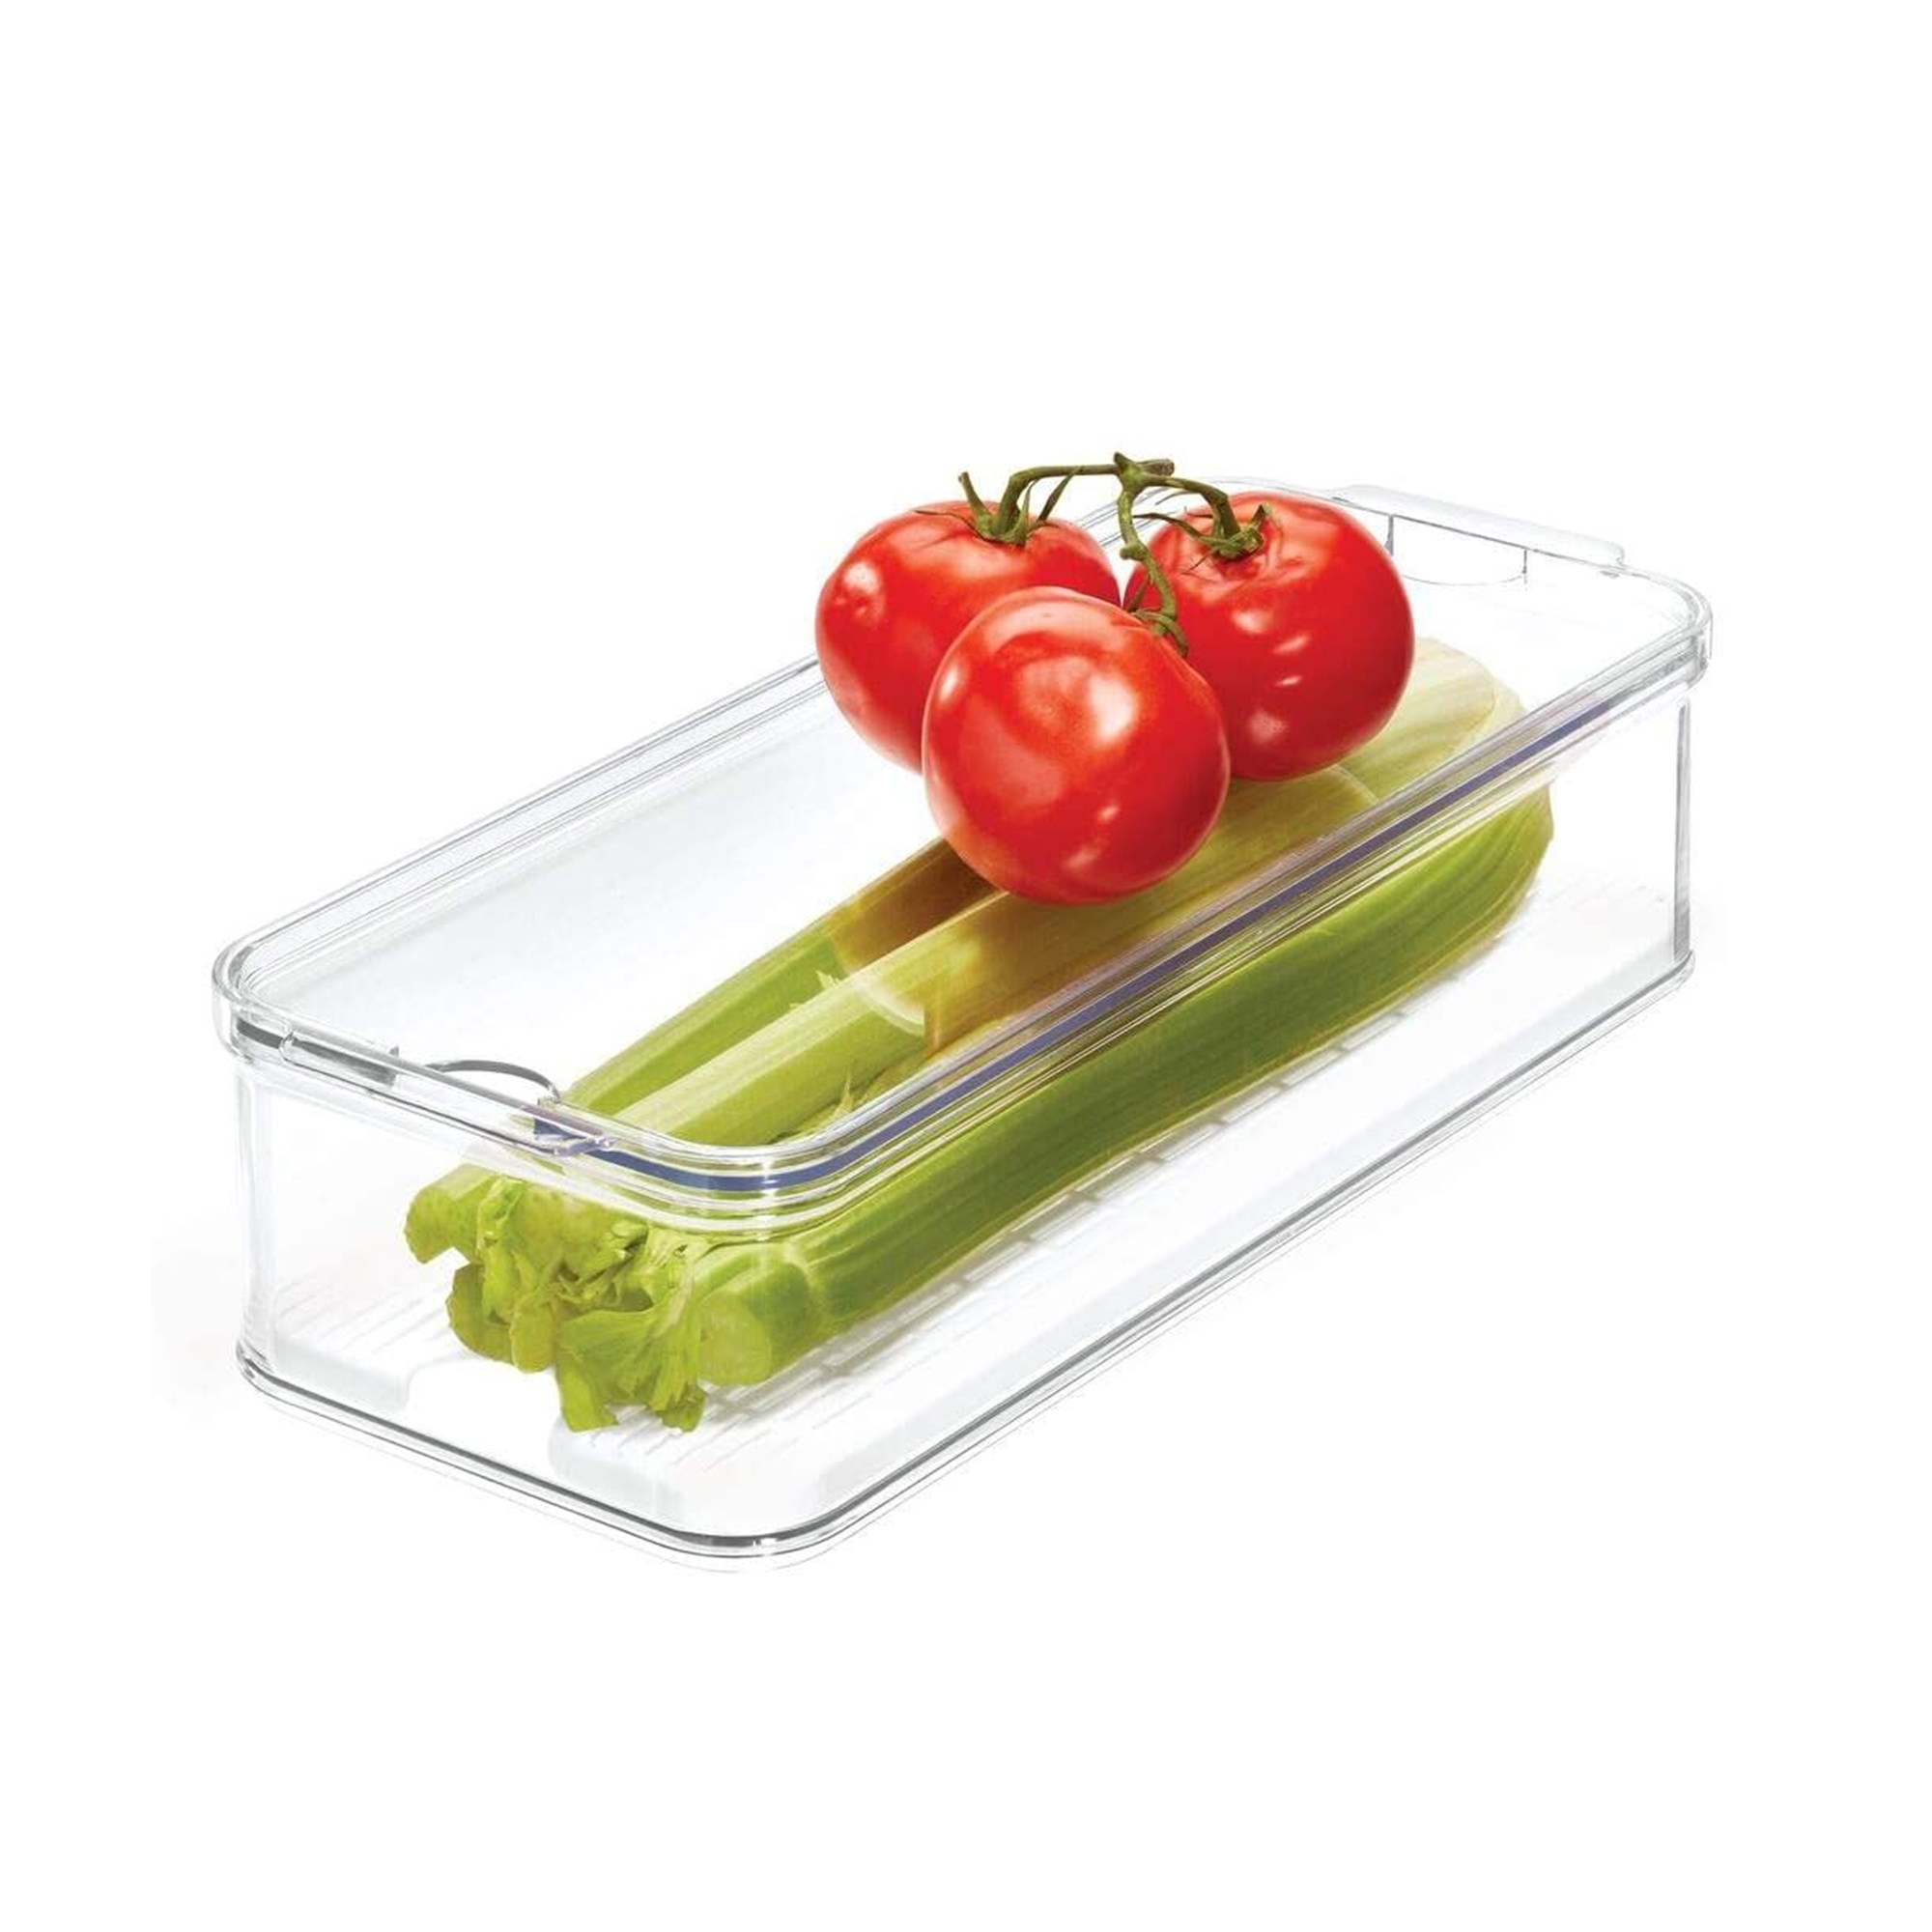 iDesign Crisp Produce Bin with Lid Clear Image 1